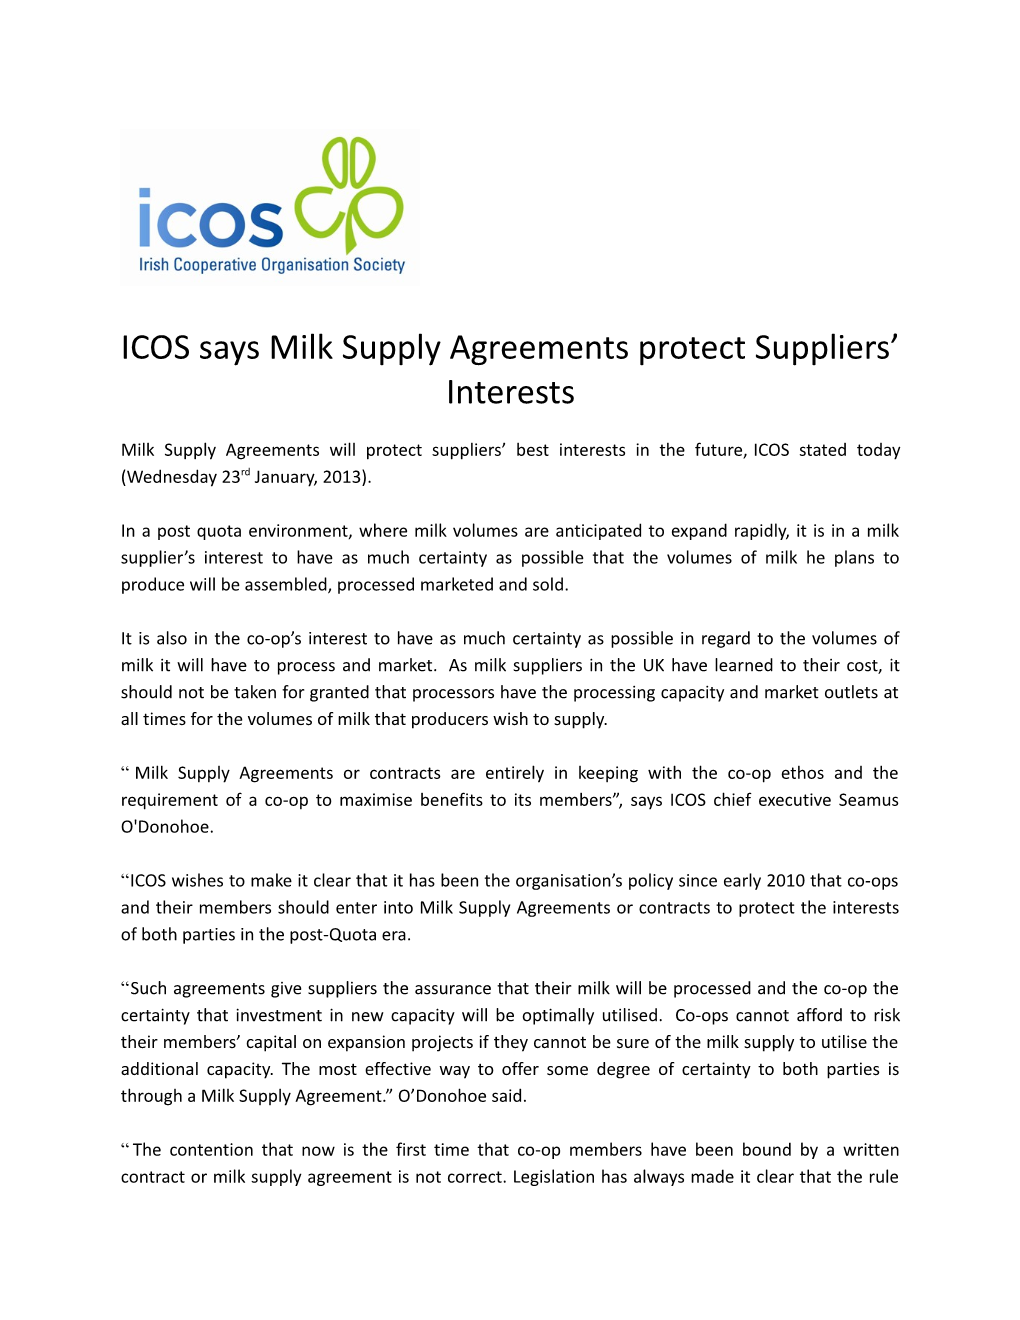 ICOS Says Milk Supply Agreements Protect Suppliers Interests